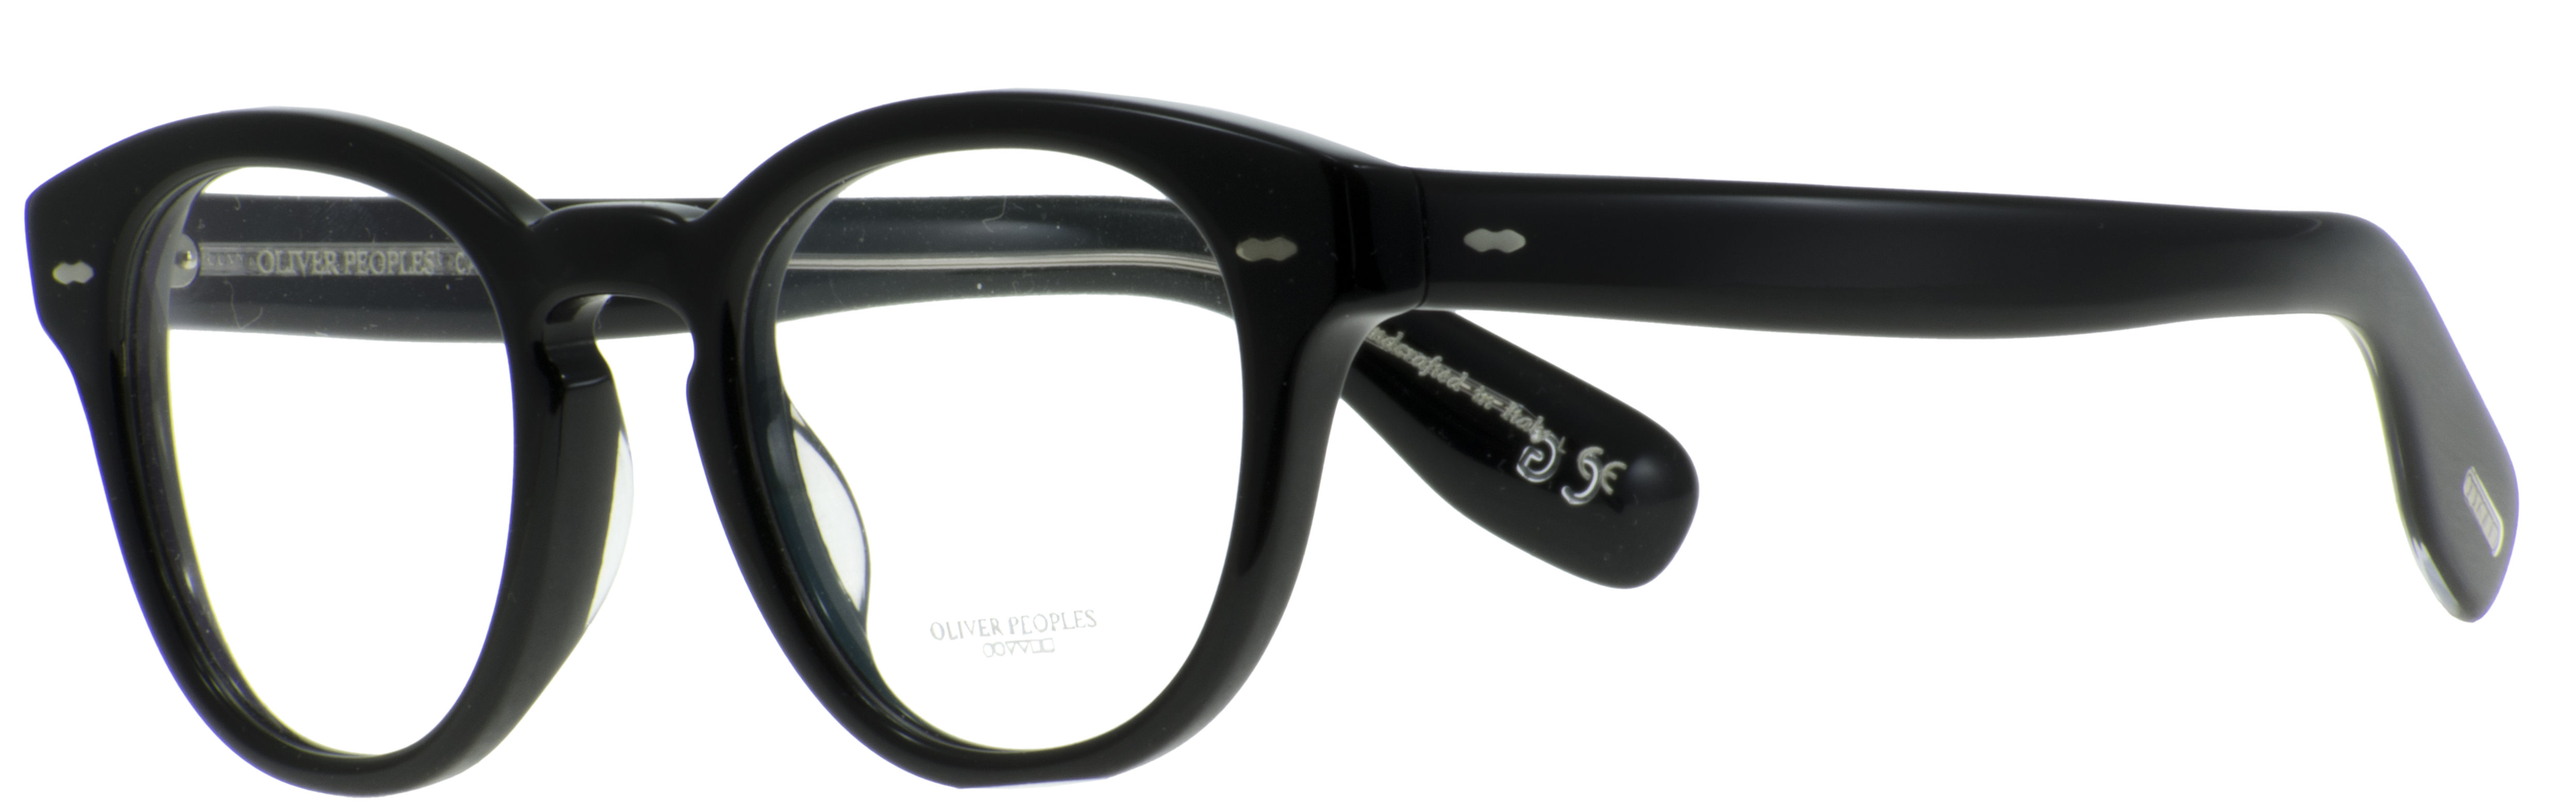 OLIVER PEOPLES Cary Grant 1492 ￥32,000 48 02